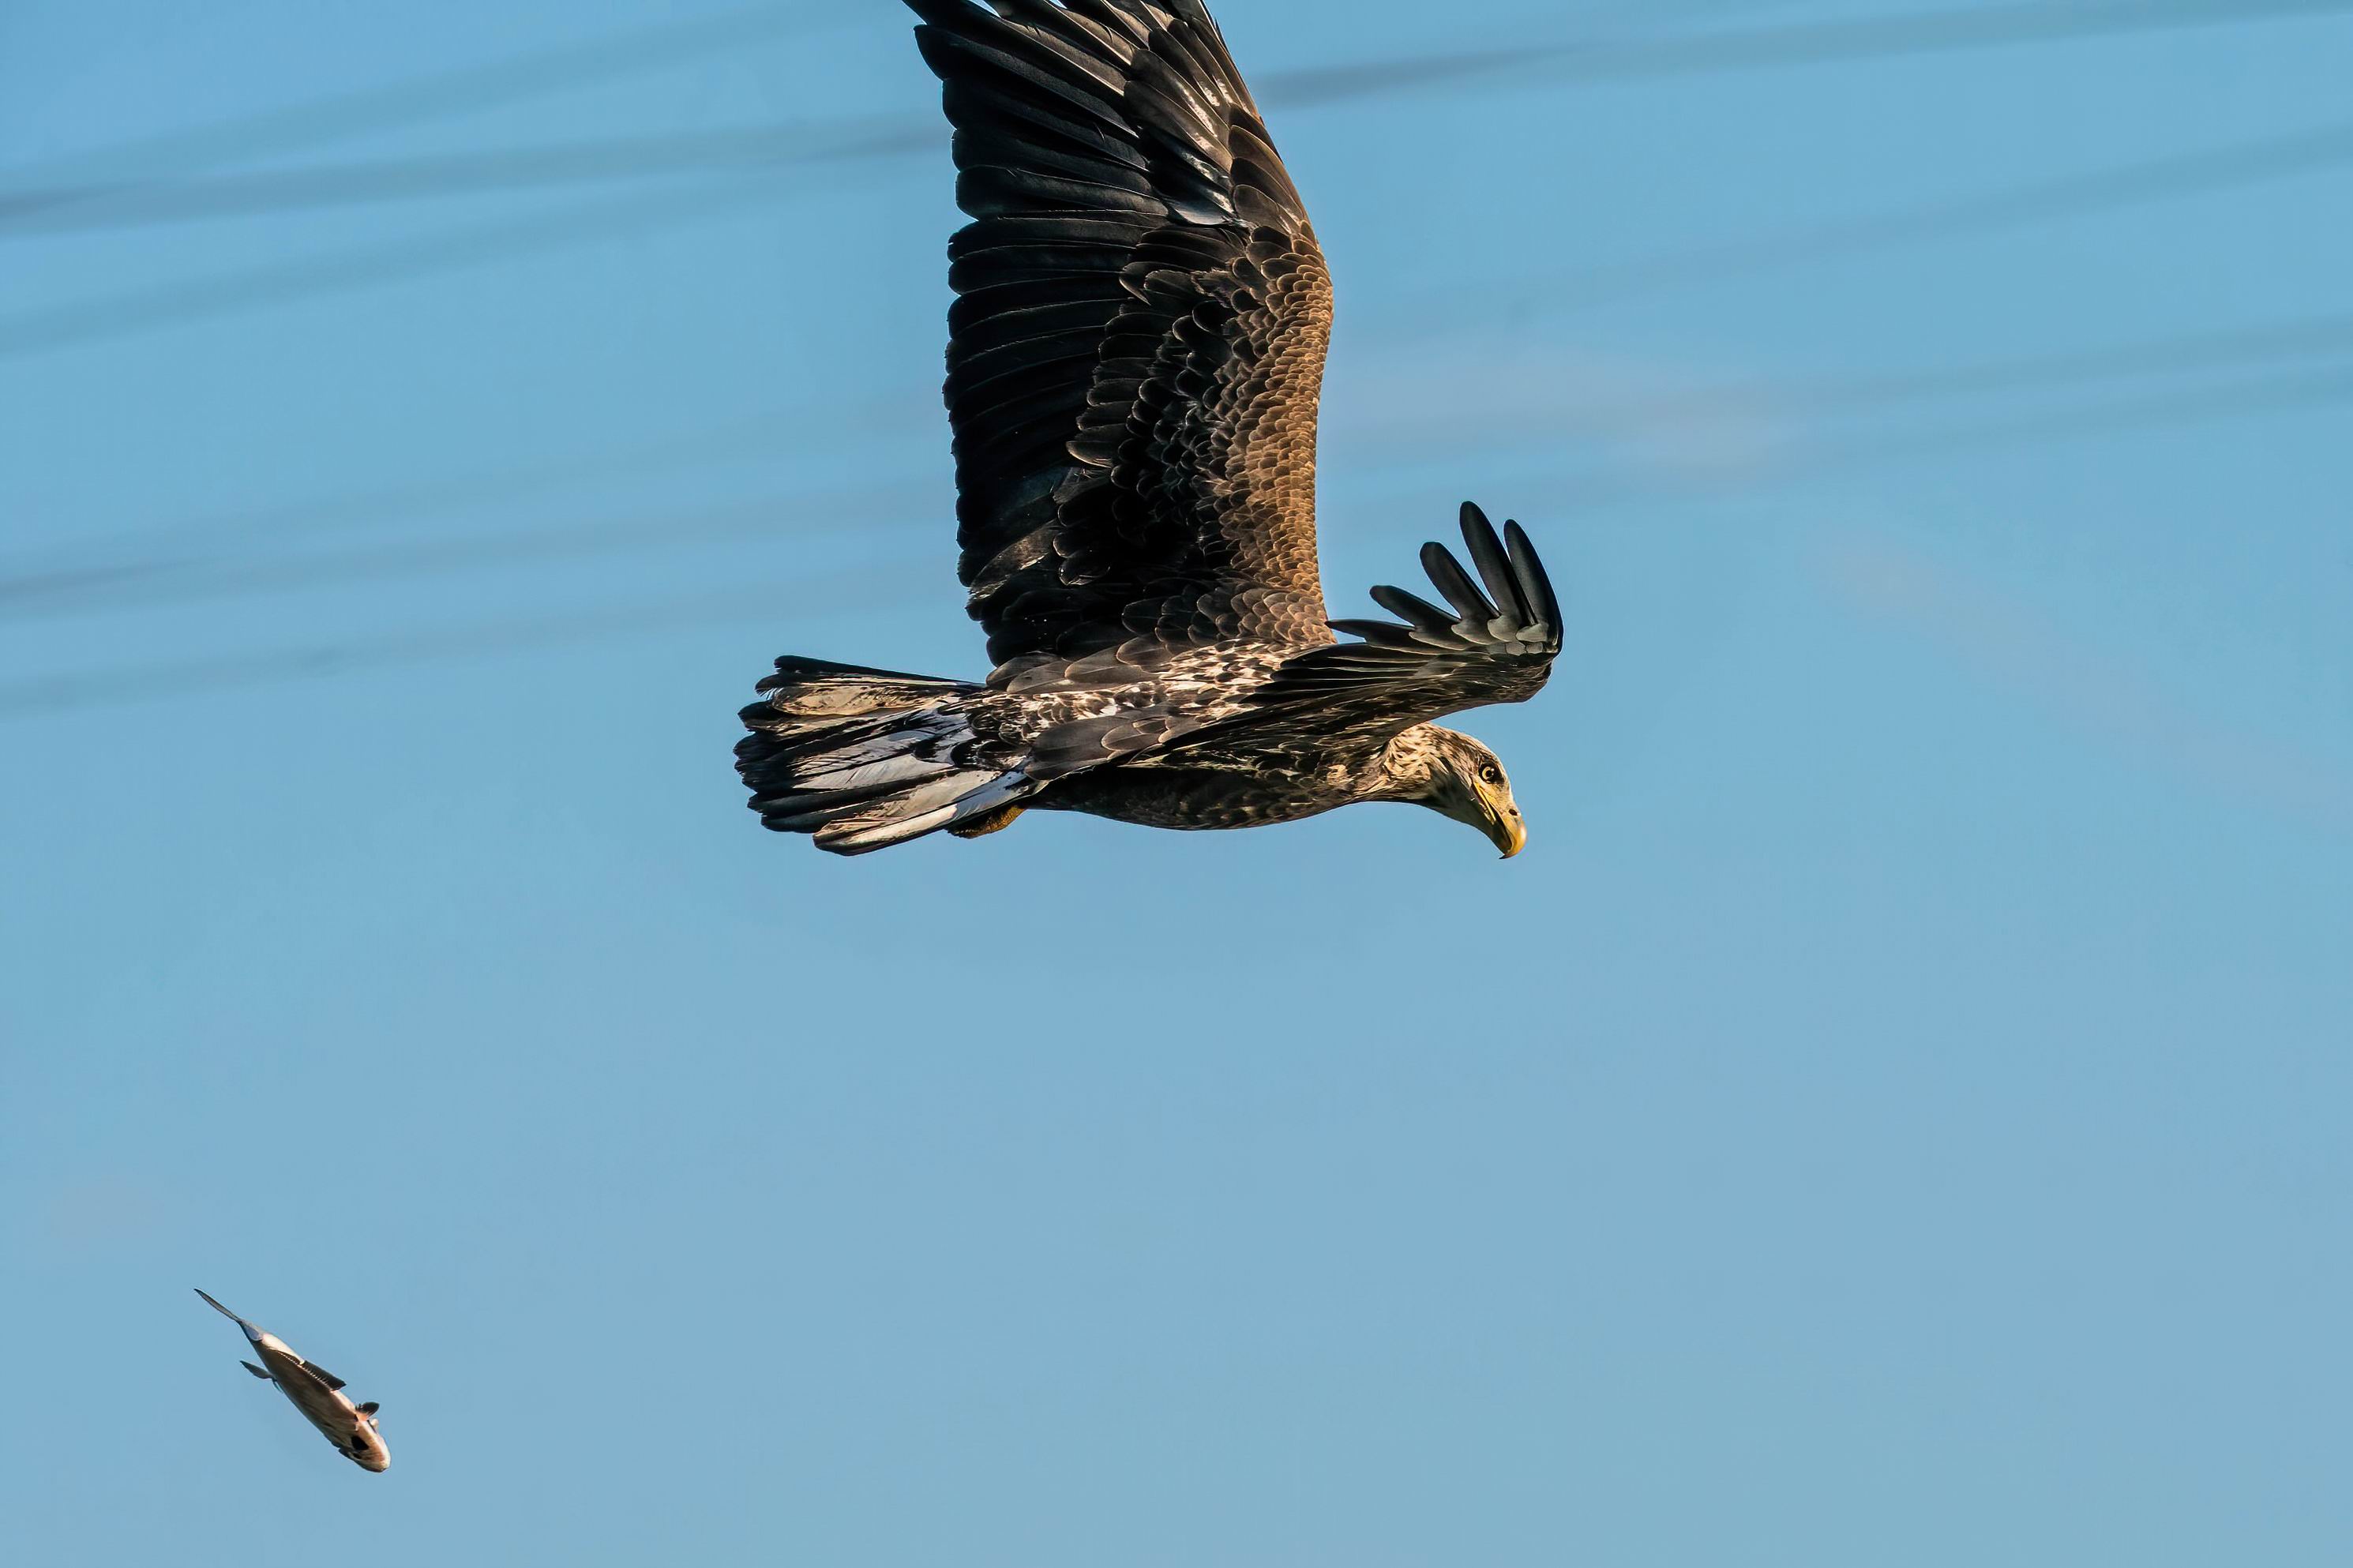 0049_Oppos Moment of a Juvenile Eagle -003.jpg